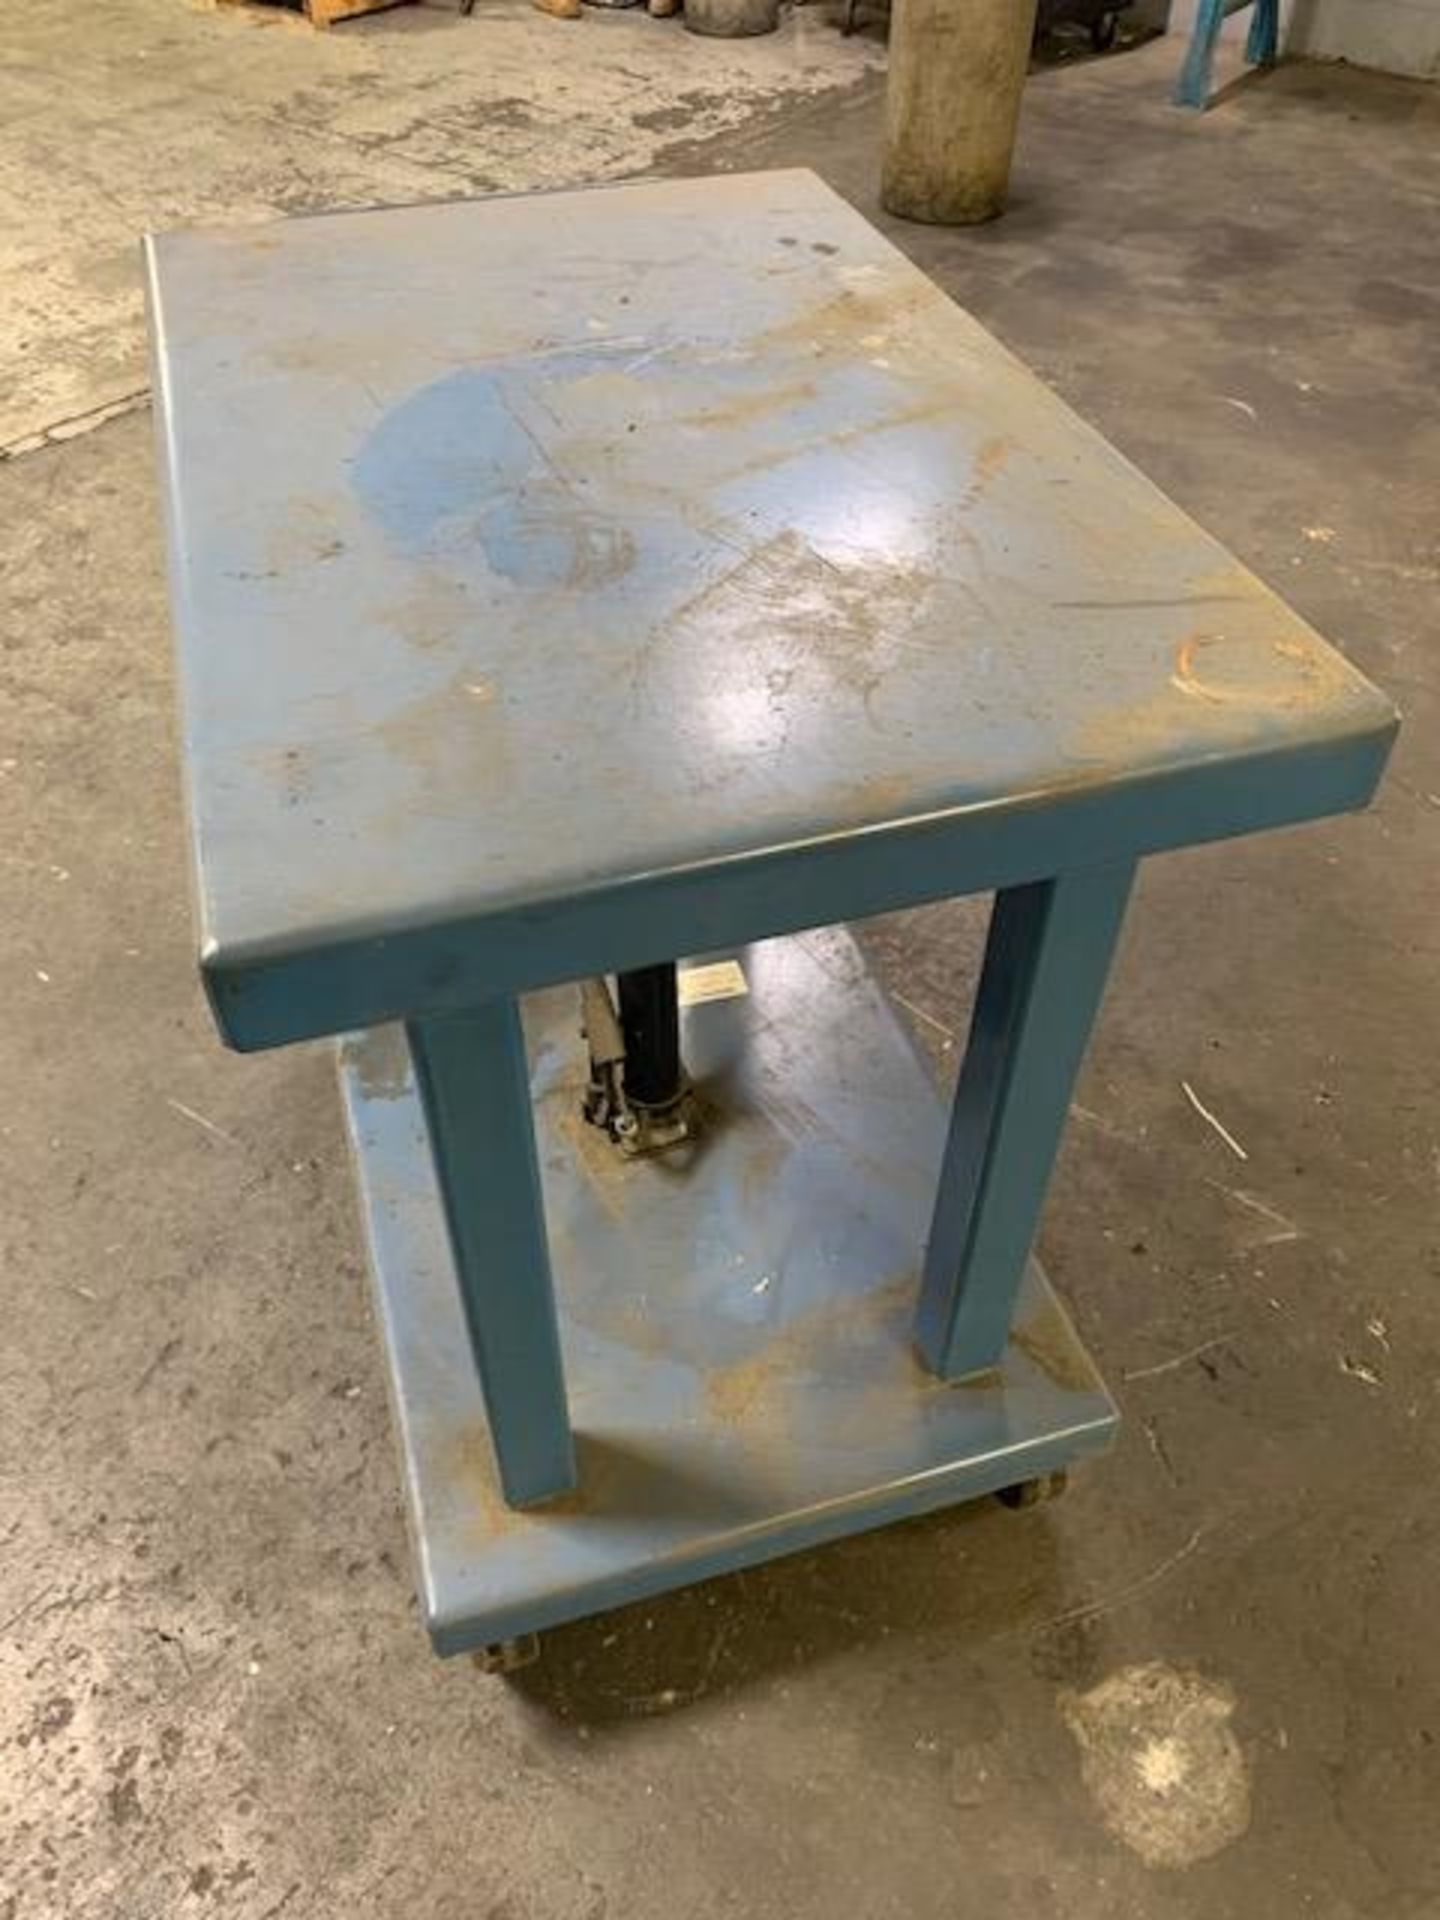 Wesco 2,000 Lb. Hydraulic Lift Table, 24" x 36" Table, Mod# LT-20-2436 - Image 7 of 7